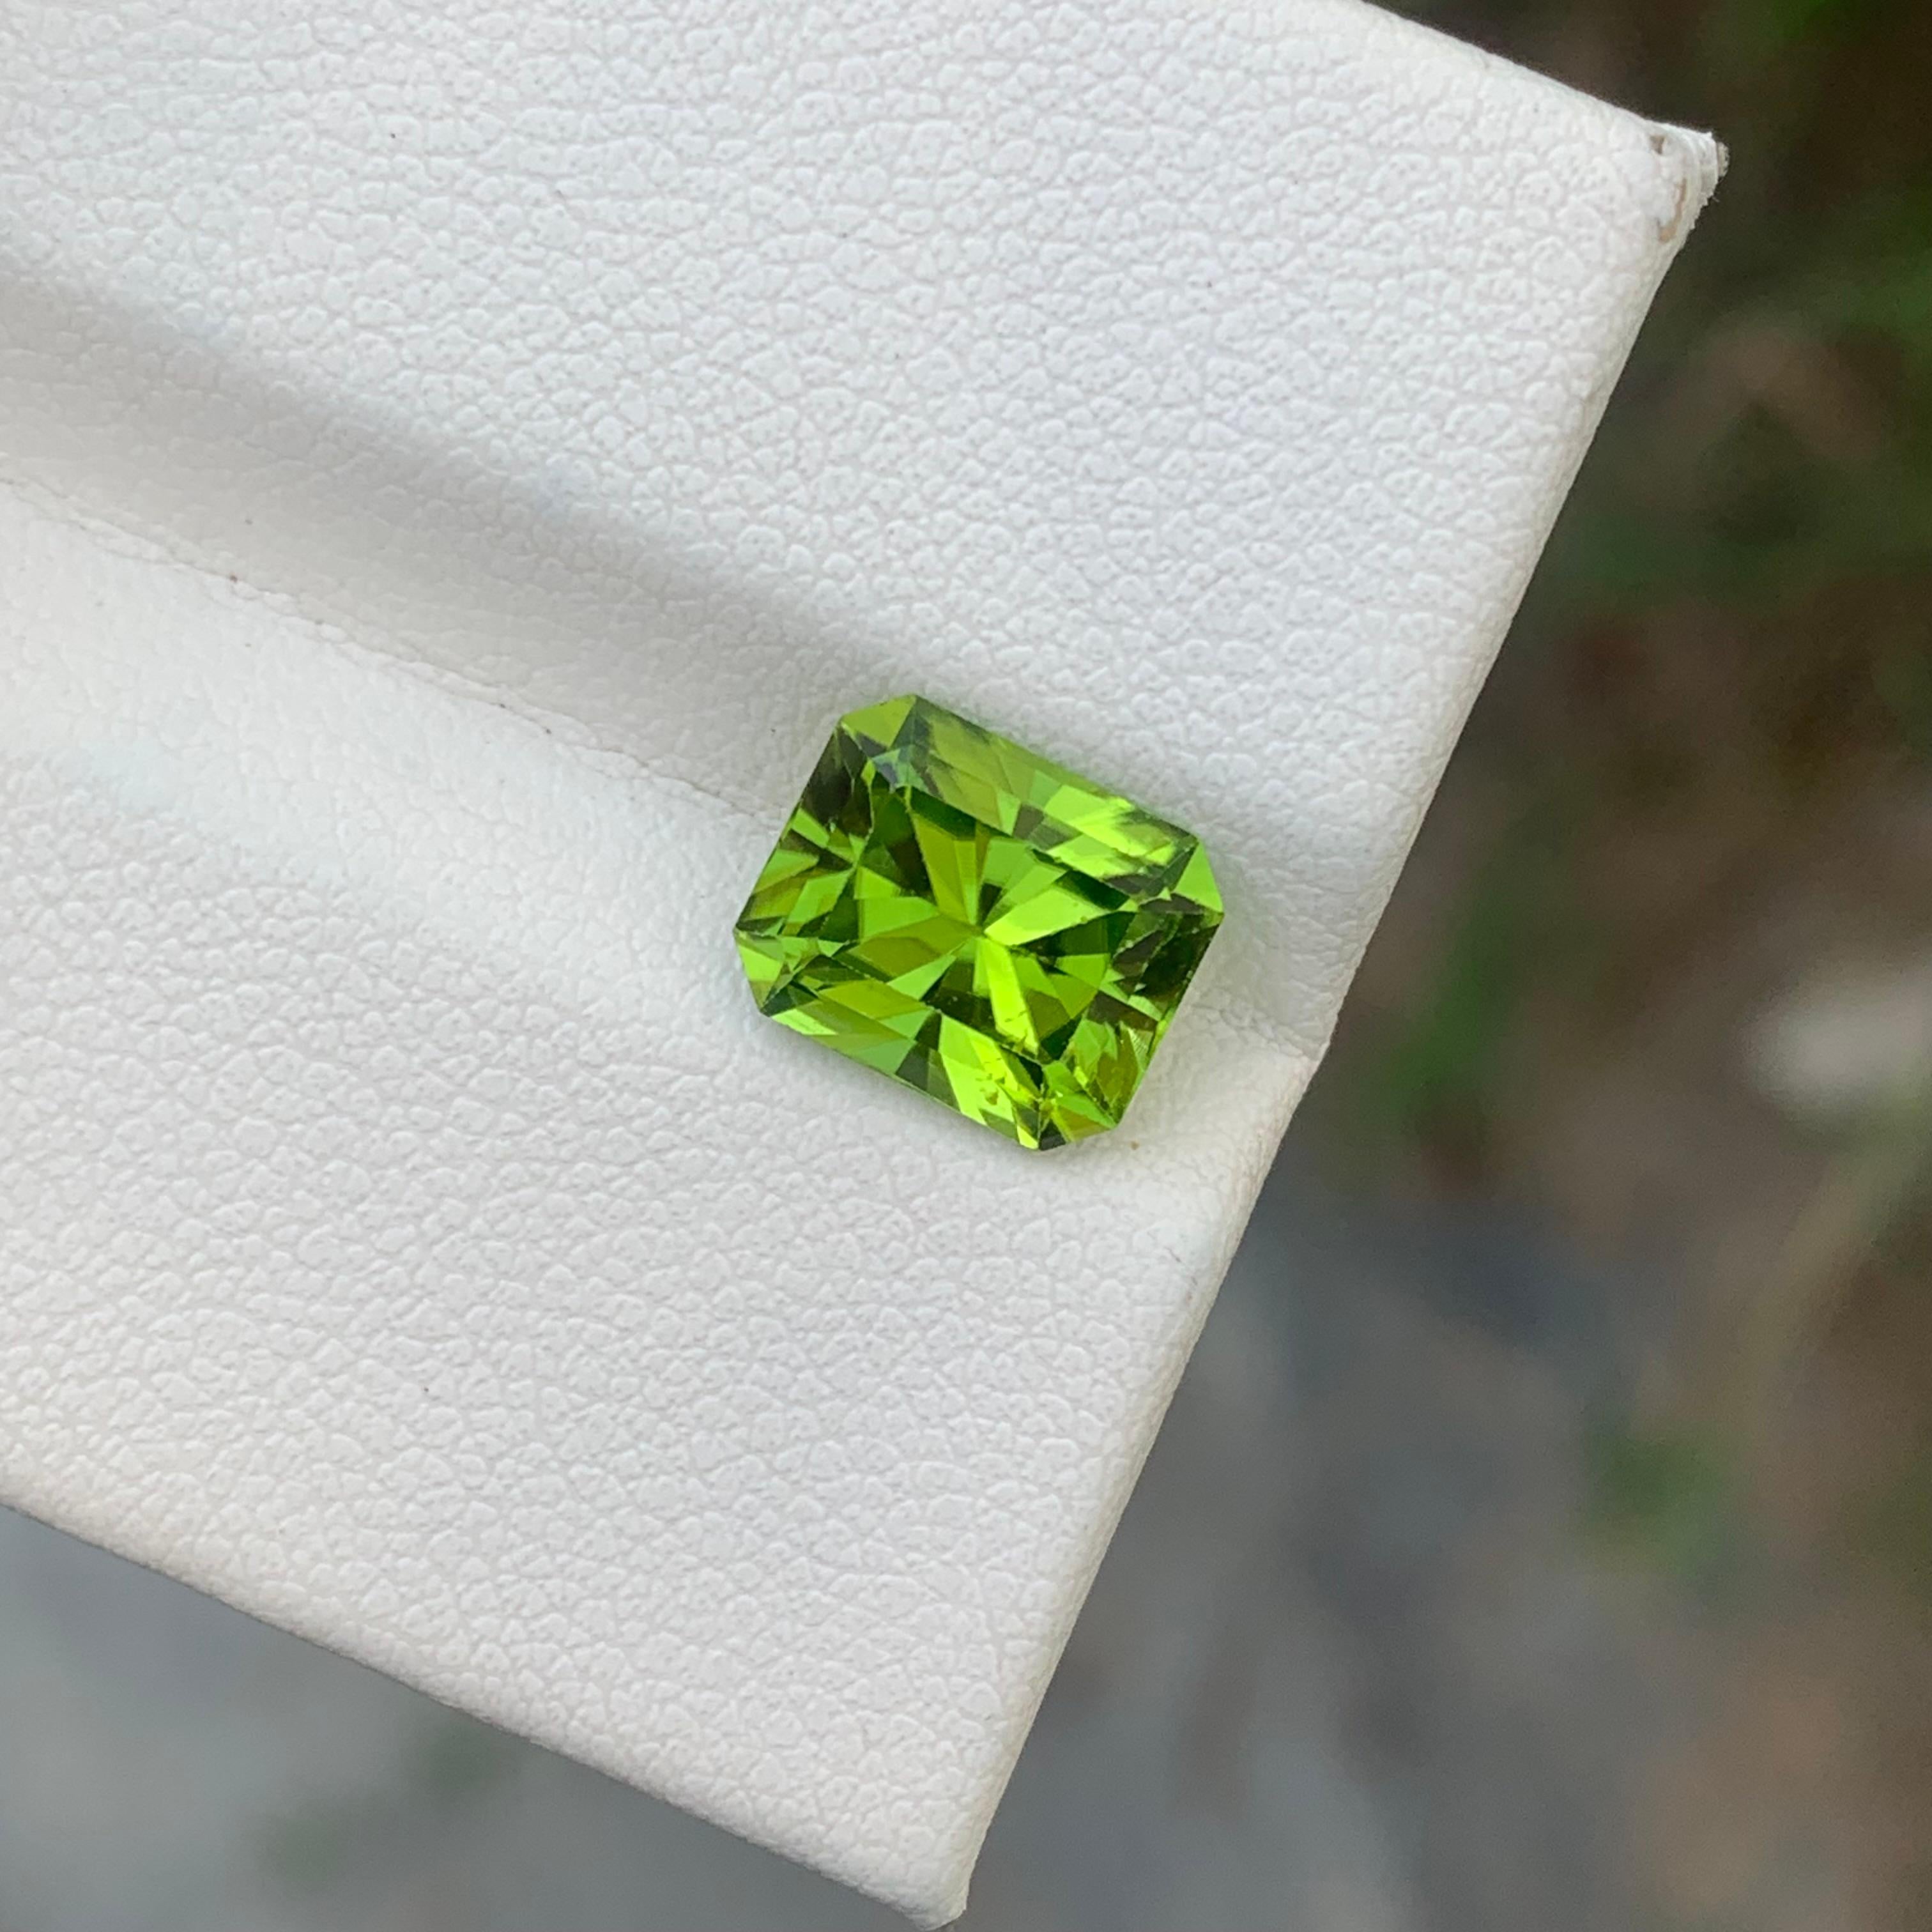 Faceted Peridot 
Weight: 3.35 Carats 
Dimension: 9.3x7.6x5.8 Mm
Origin: Supat Valley Pakistan 
Color: Green
Treatment: Non
Certificate: On Client Demand
Shape: Emerald 
Peridot, often referred to as the 